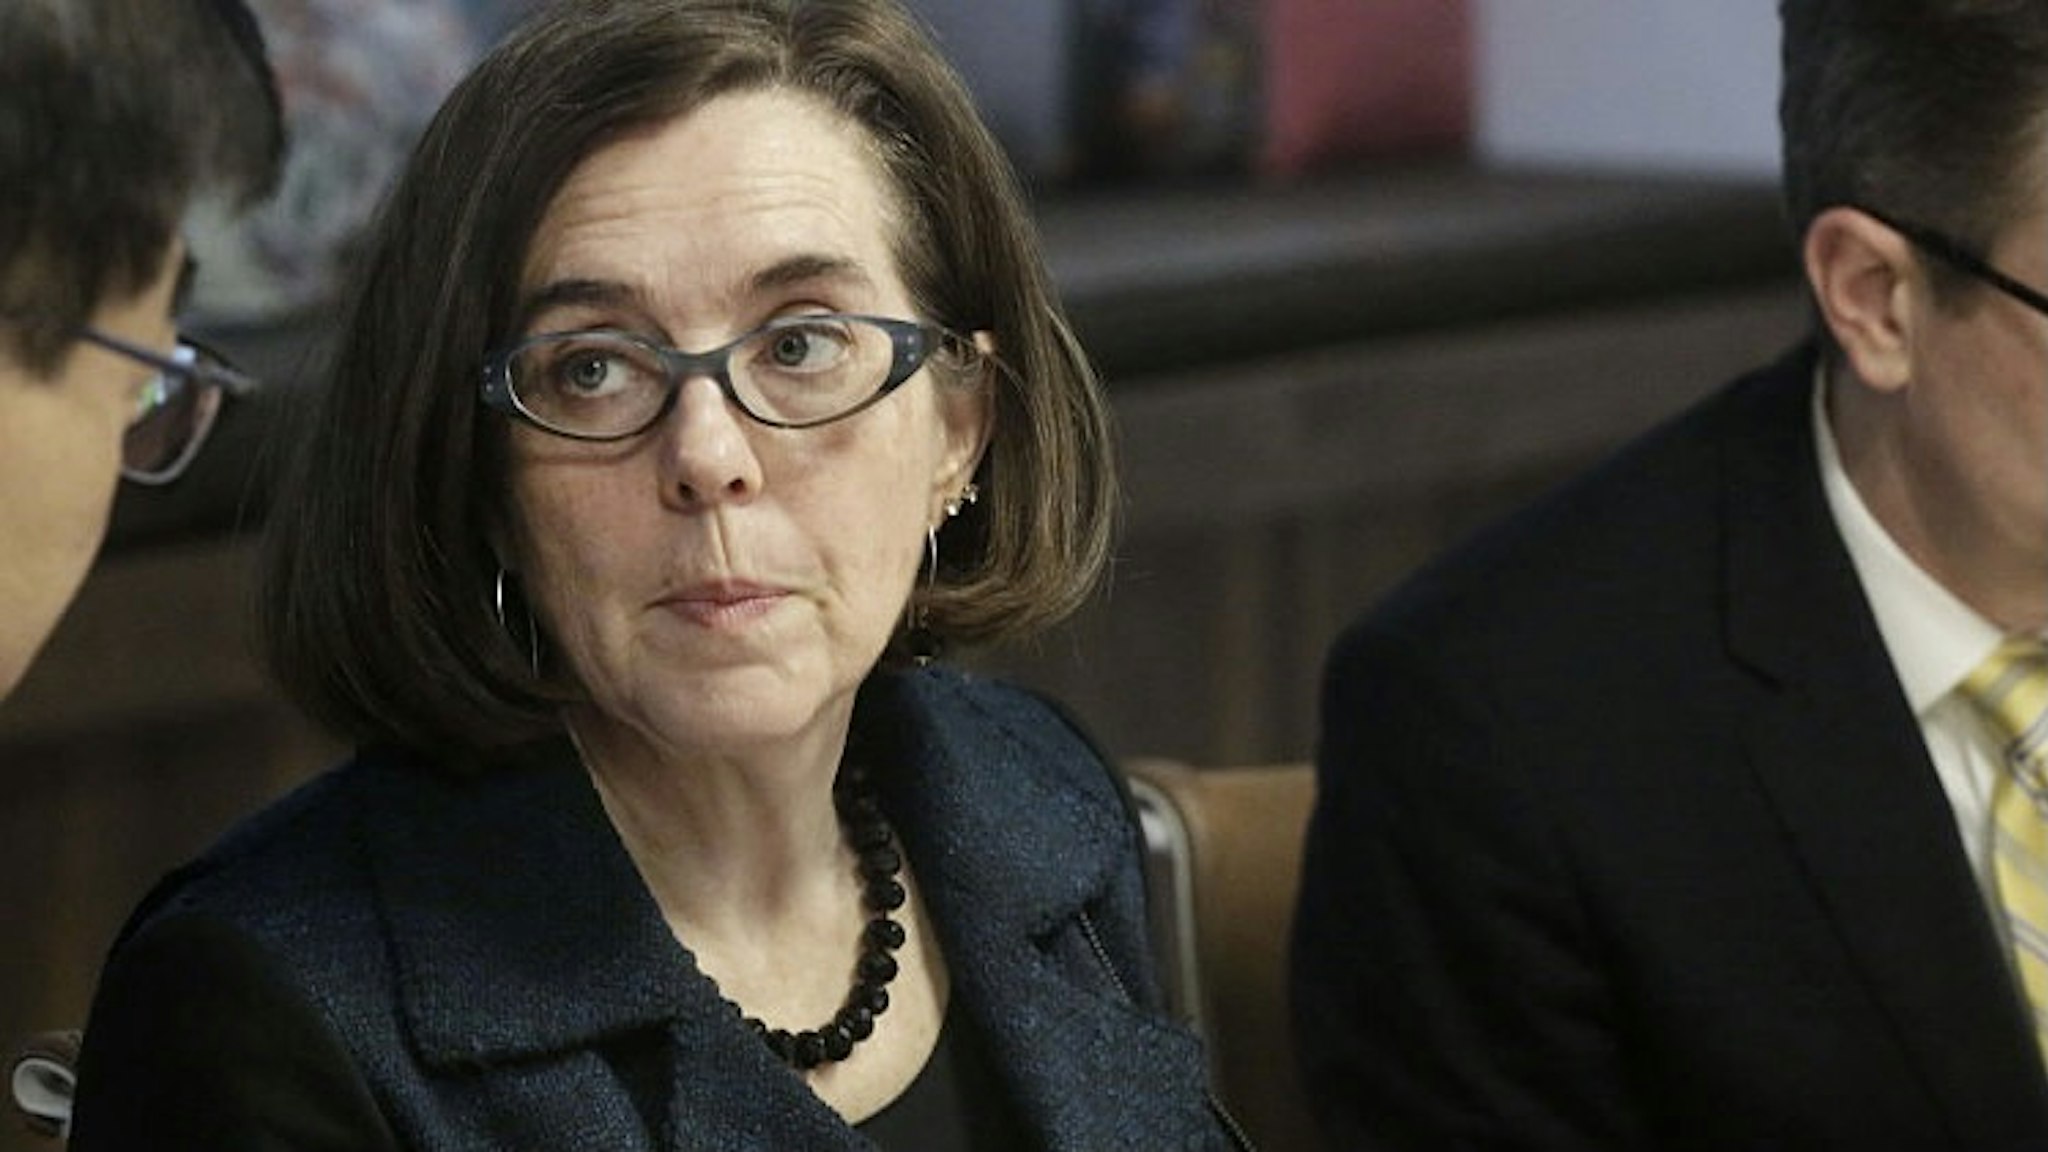 Oregon Governor Kate Brown Interview Kate Brown, governor of Oregon, center, listens during an interview in Portland, Oregon, U.S. on Wednesday, Jan. 20, 2016. Brown, a Democrat, joined the state House of Representatives in 1991, was later elected to the Senate and served as secretary of state since 2009, before taking over as governor in February. Photographer: Meg Roussos/Bloomberg via Getty Images